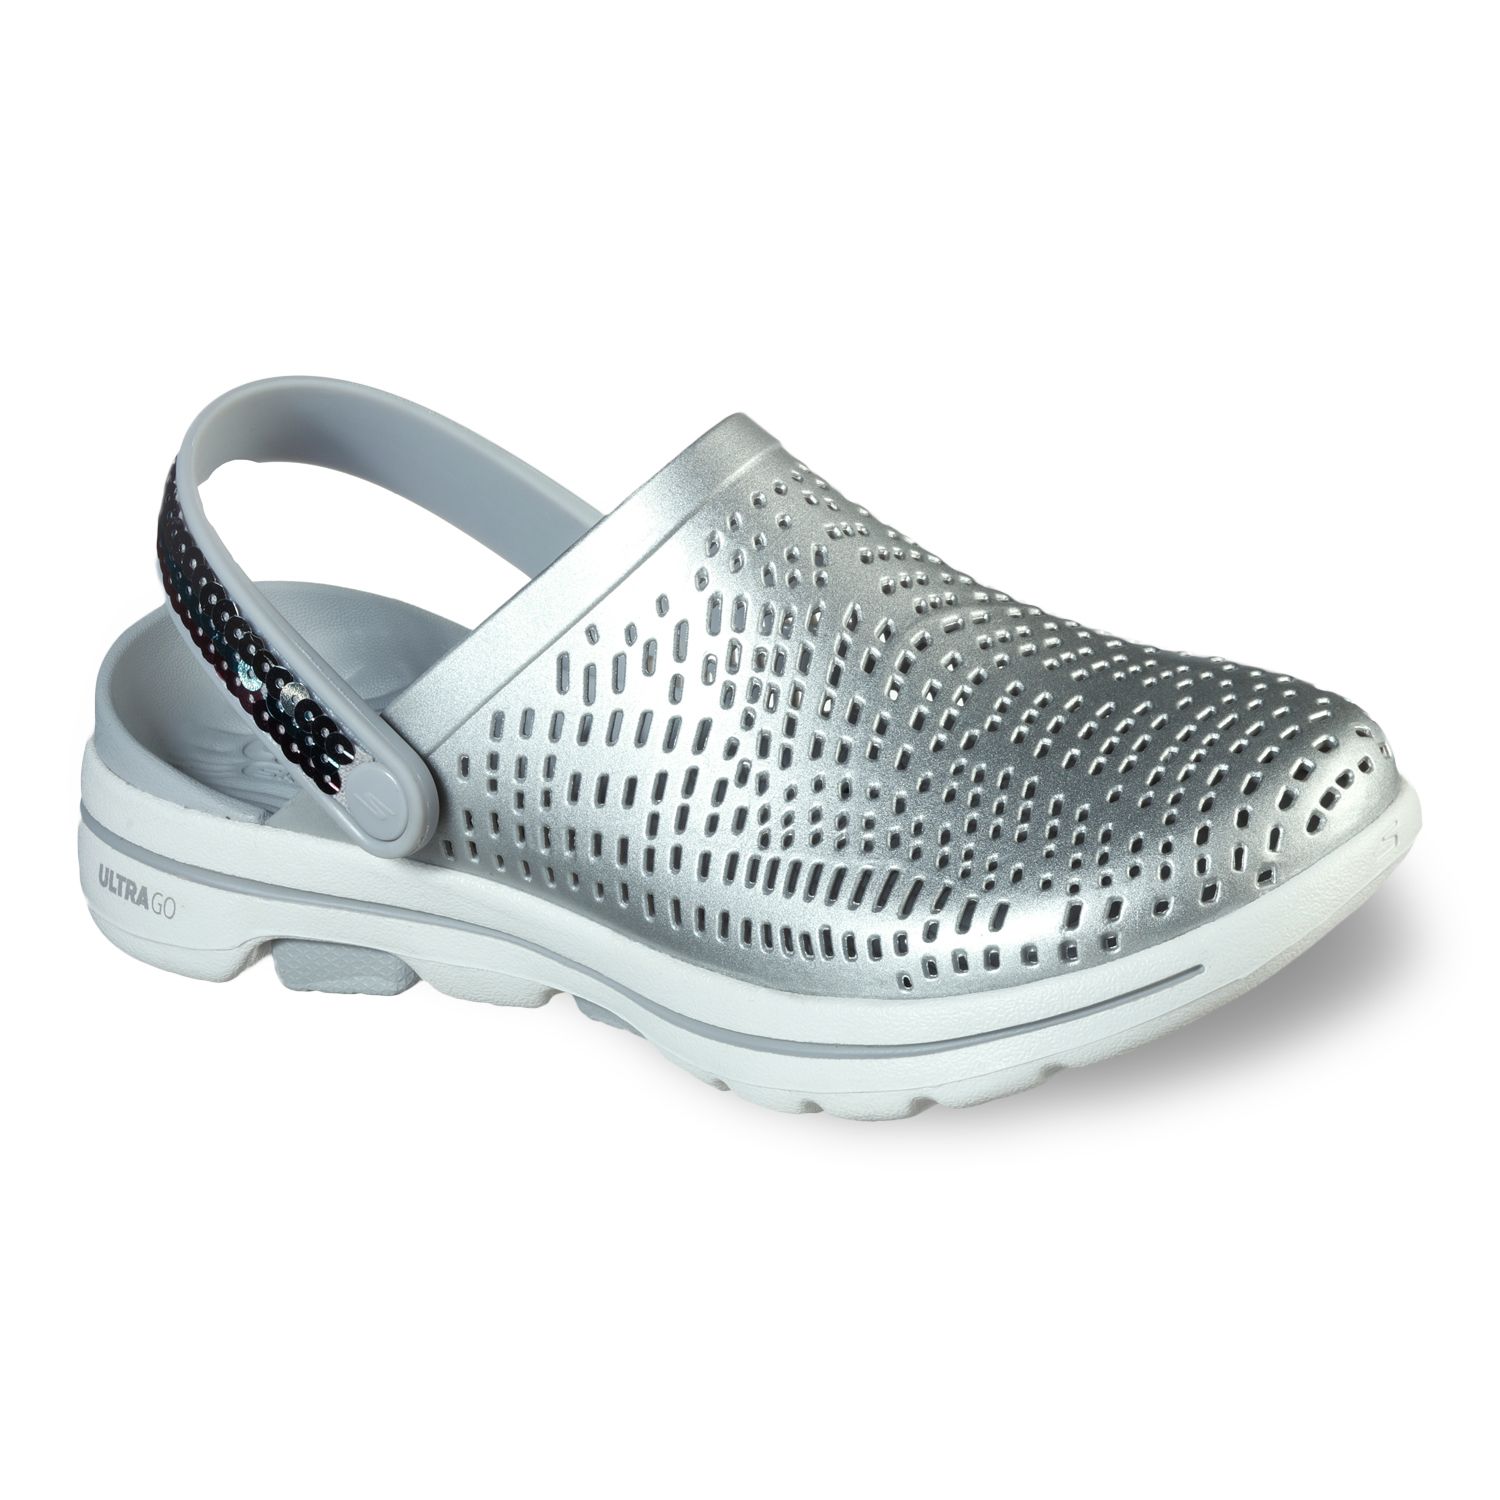 unidad Helecho comportarse Skechers Go Walk Clogs Clearance, SAVE 57%.